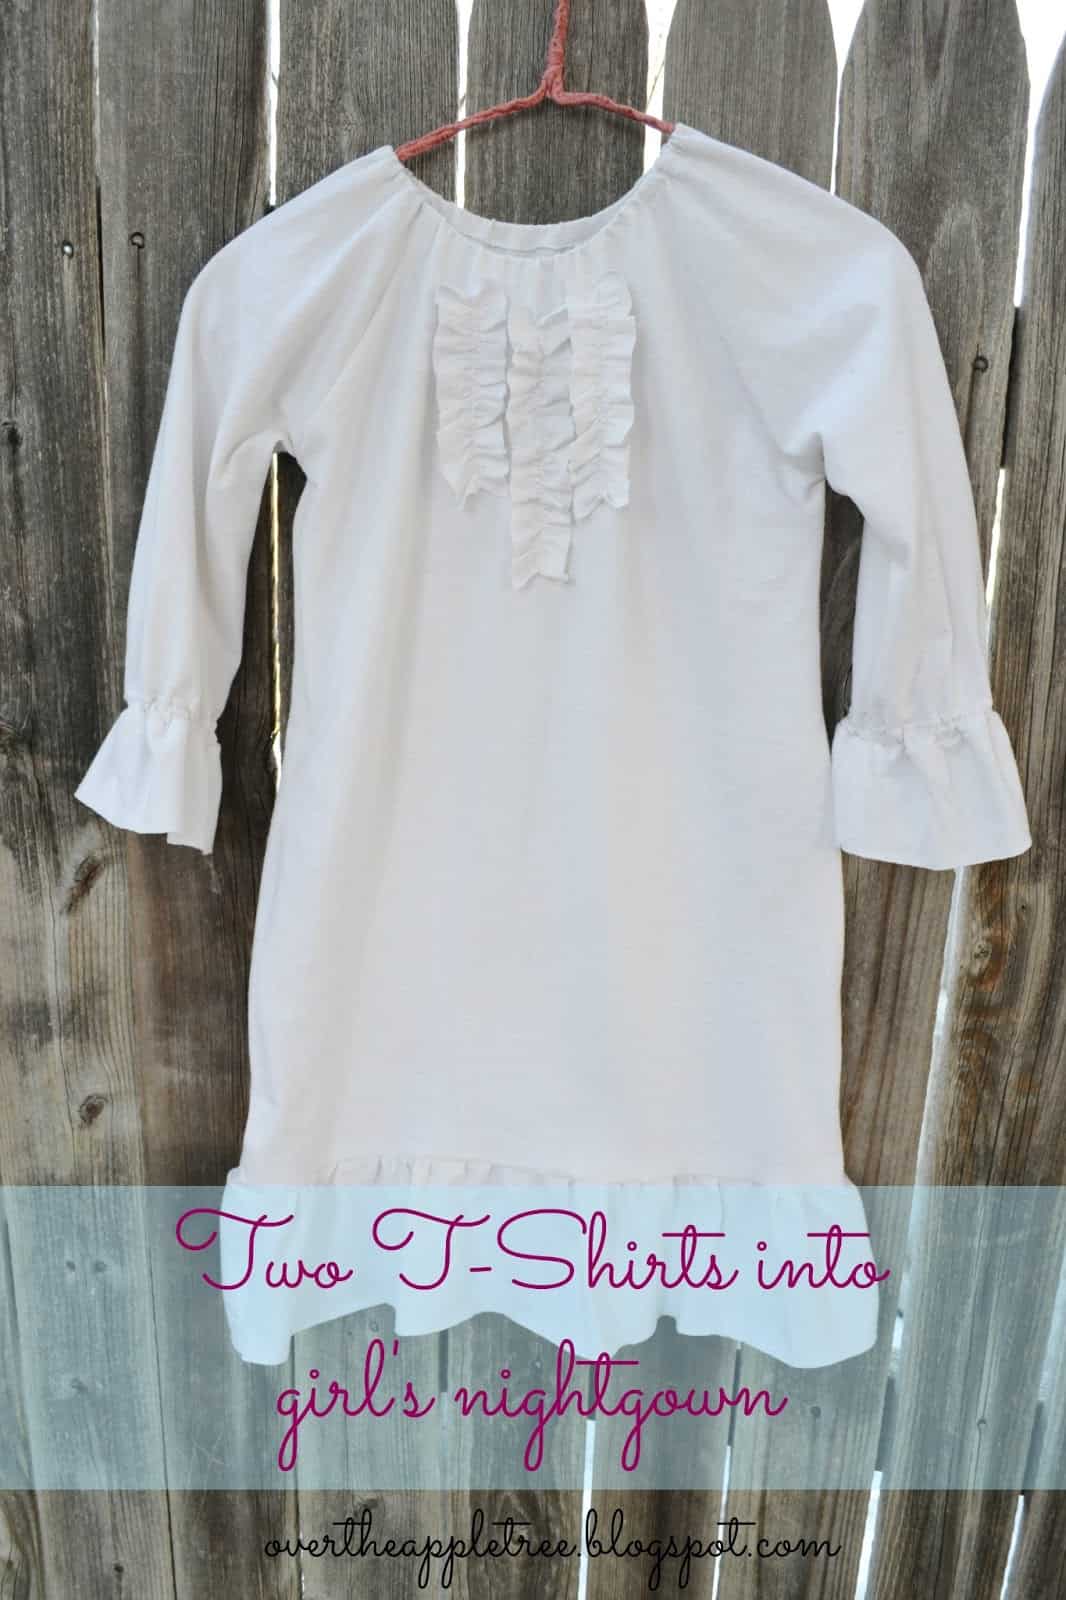 Two t-shirts into a pretty child’s nightgown